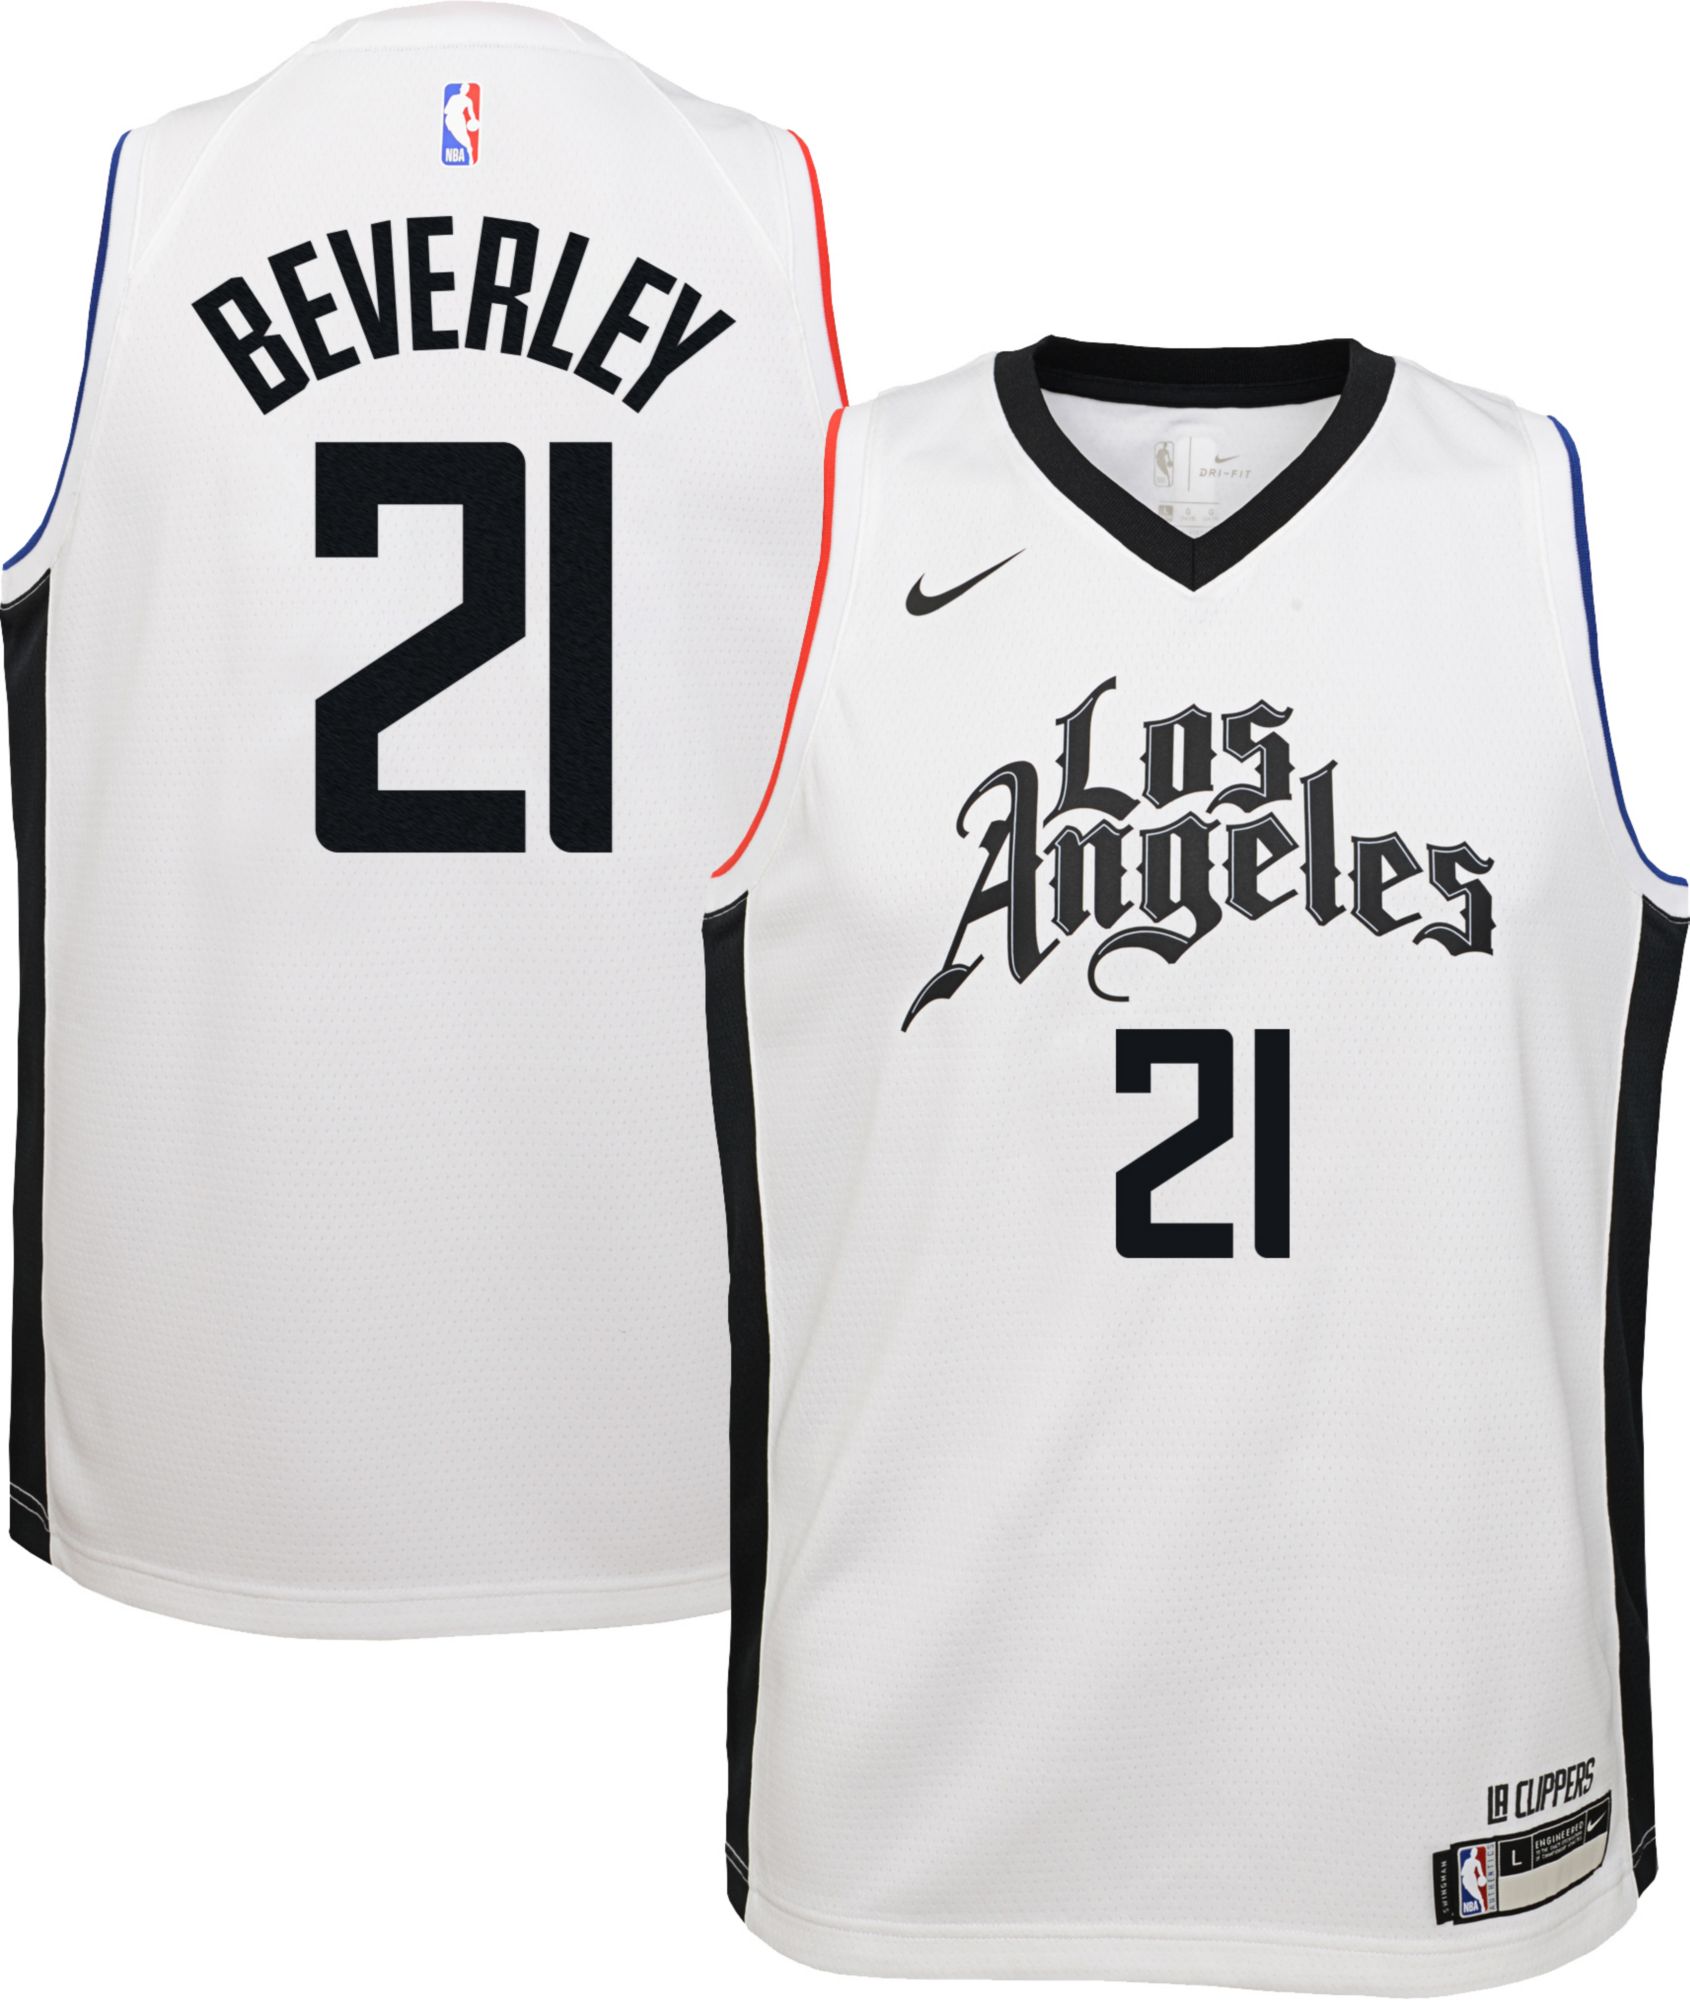 los clippers jersey